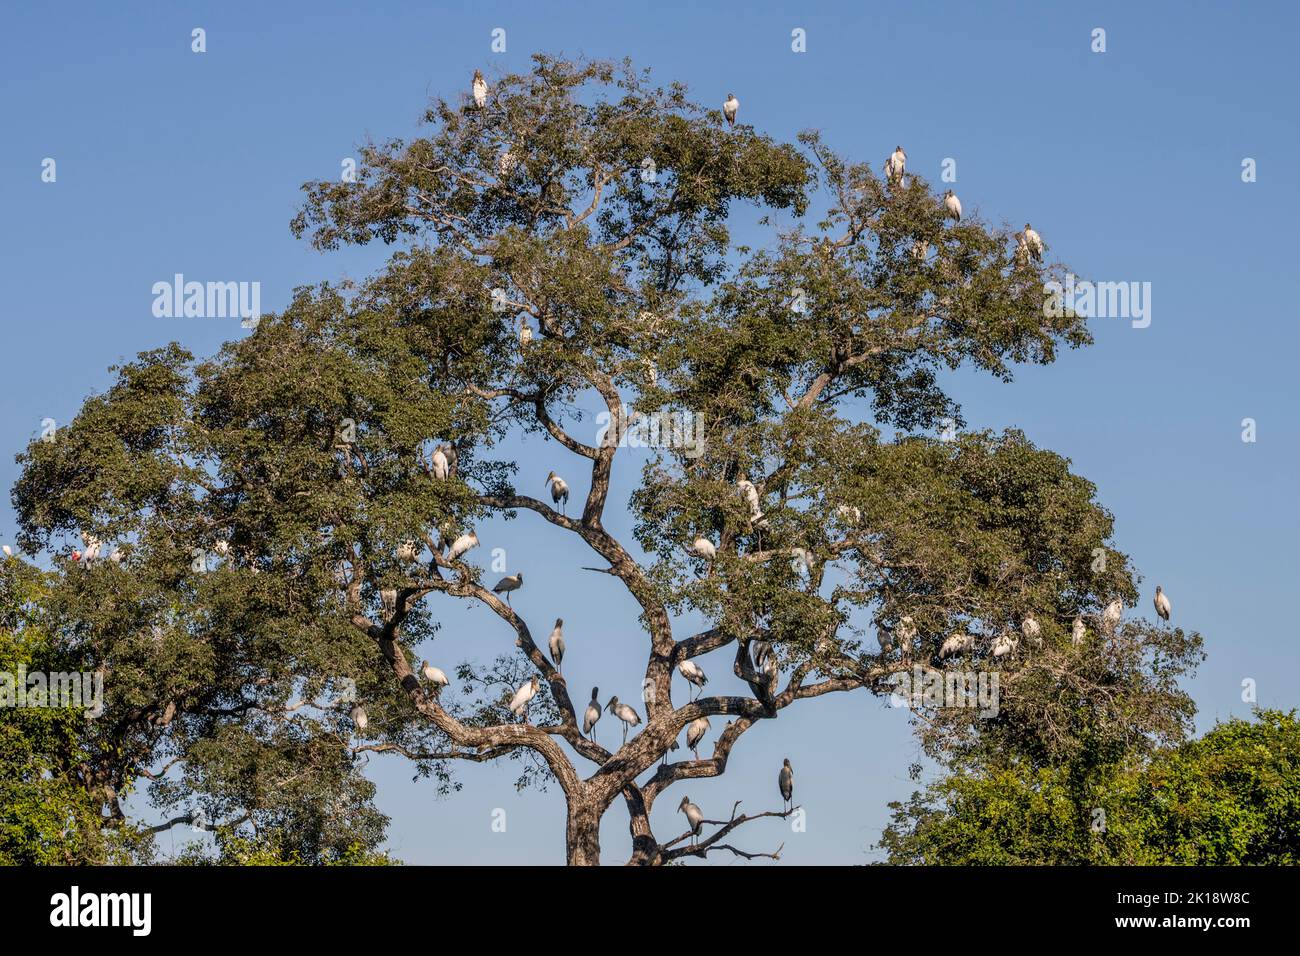 Wood storks (Mycteria americana) roosting in a tree along the Transpantaneira Highway in the northern Pantanal, Mato Grosso province in Brazil. Stock Photo